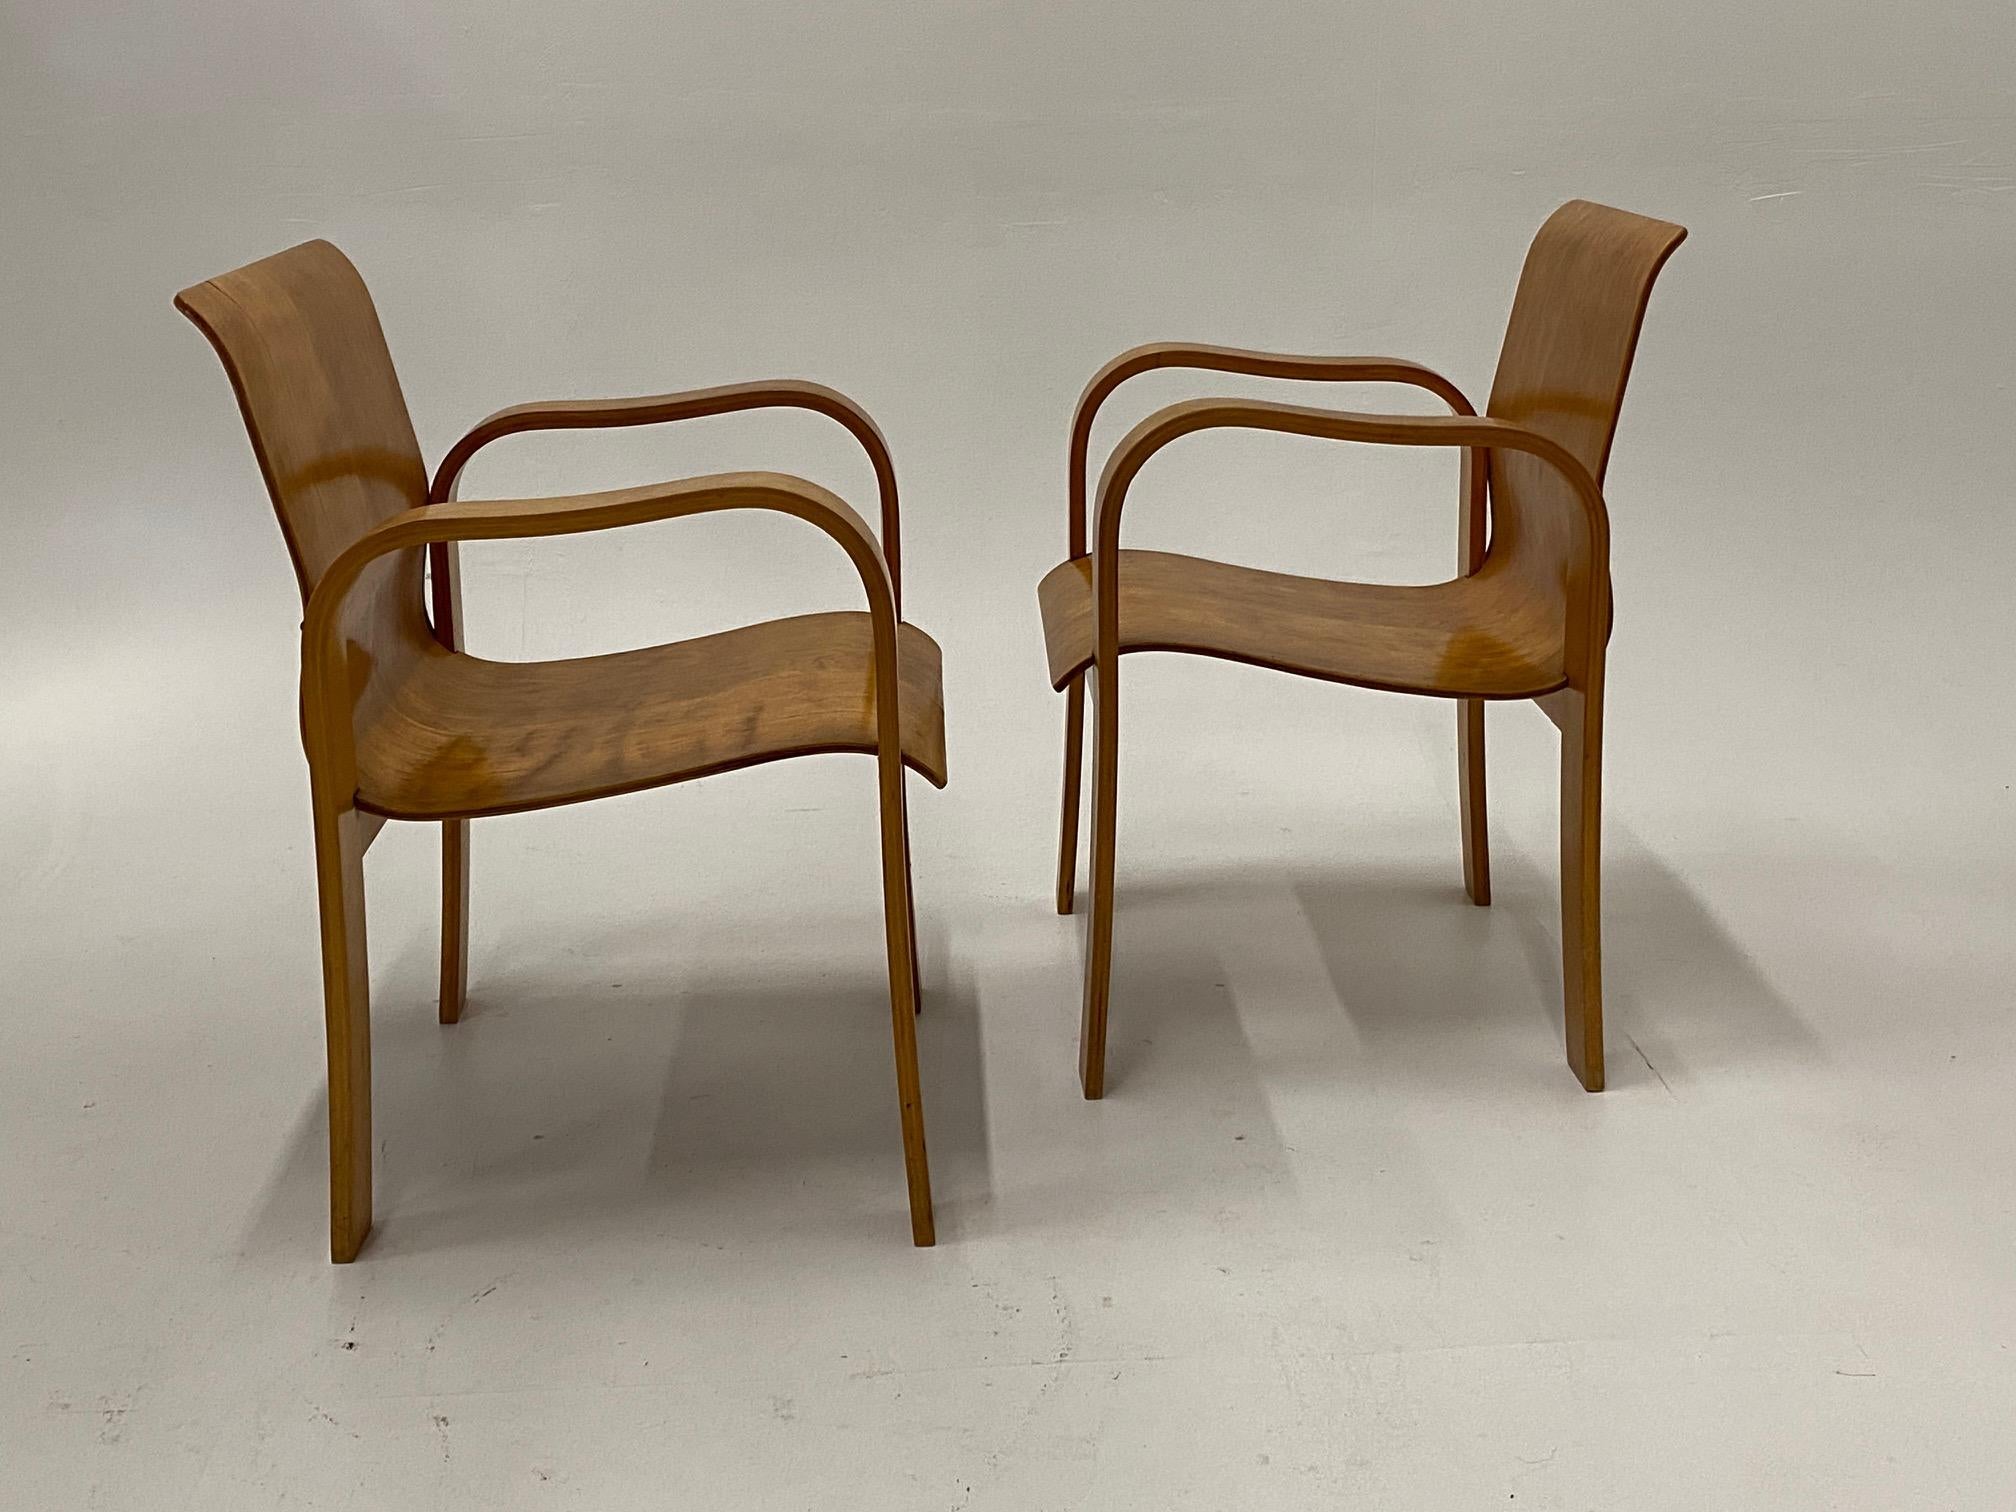 Rare Pair of Sleek Molded Plywood Mid-Century Modern Armchairs For Sale 2